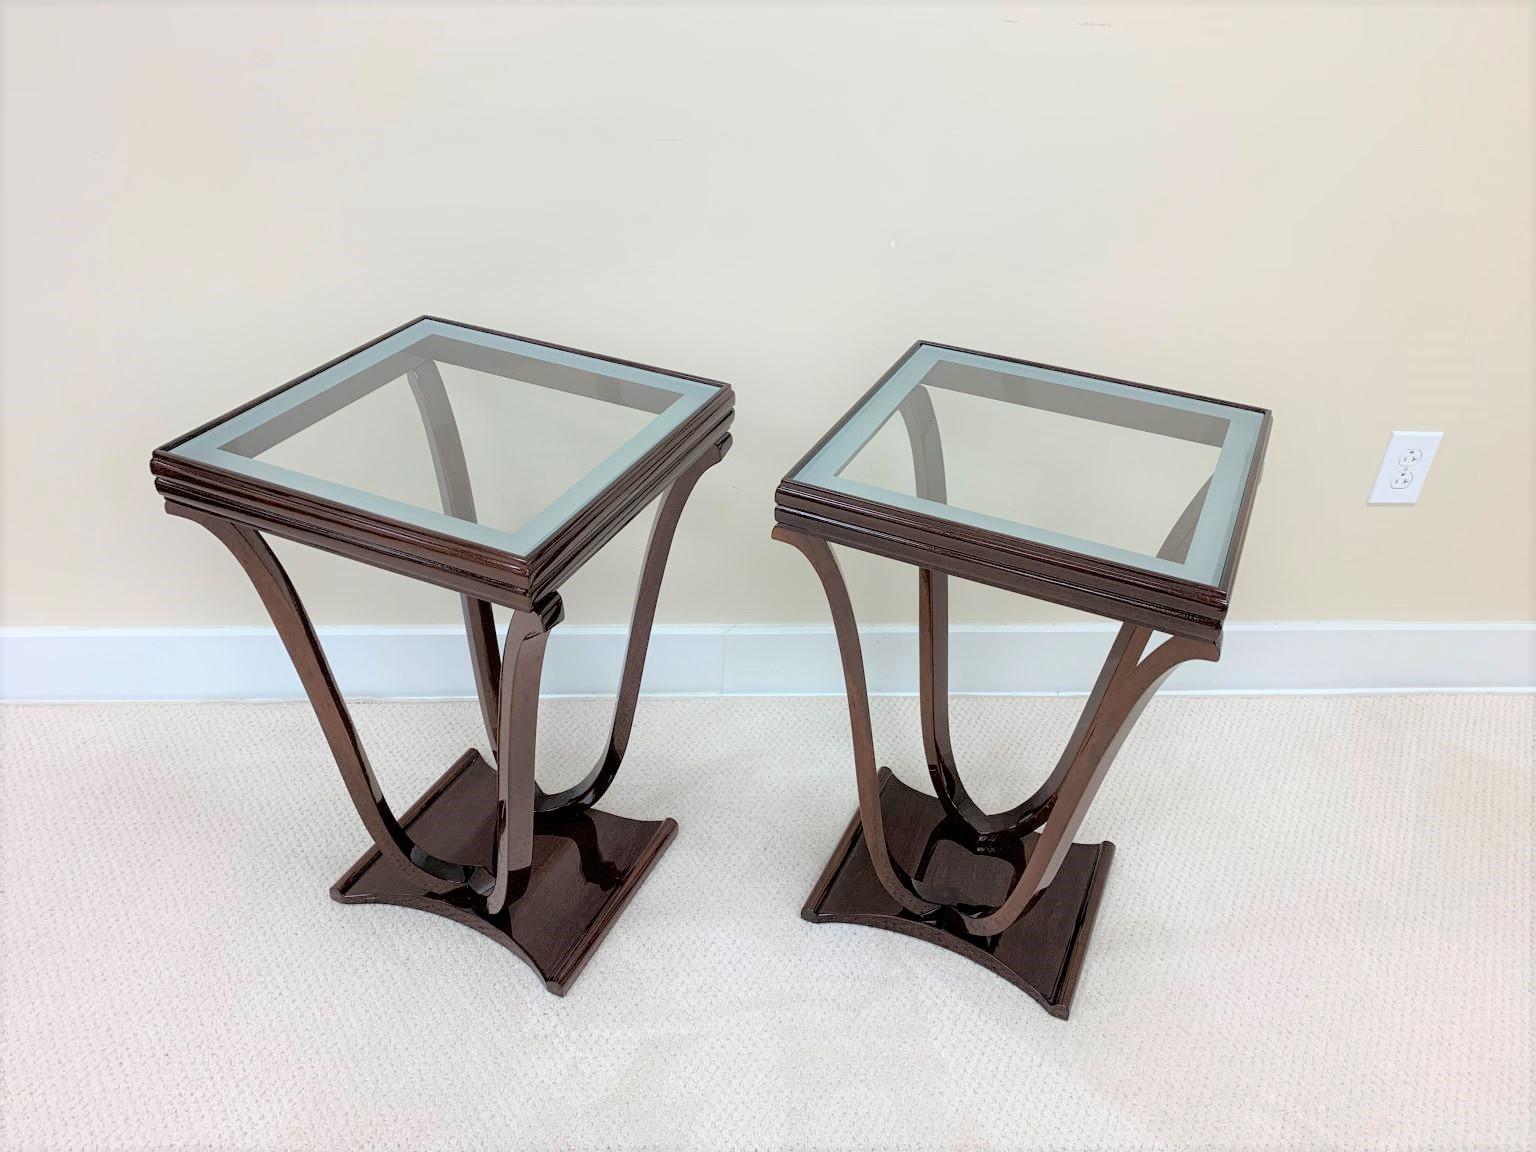 American Pair of  Elegant Art Deco Tulip Shaped Glass Top End Tables C.1930's